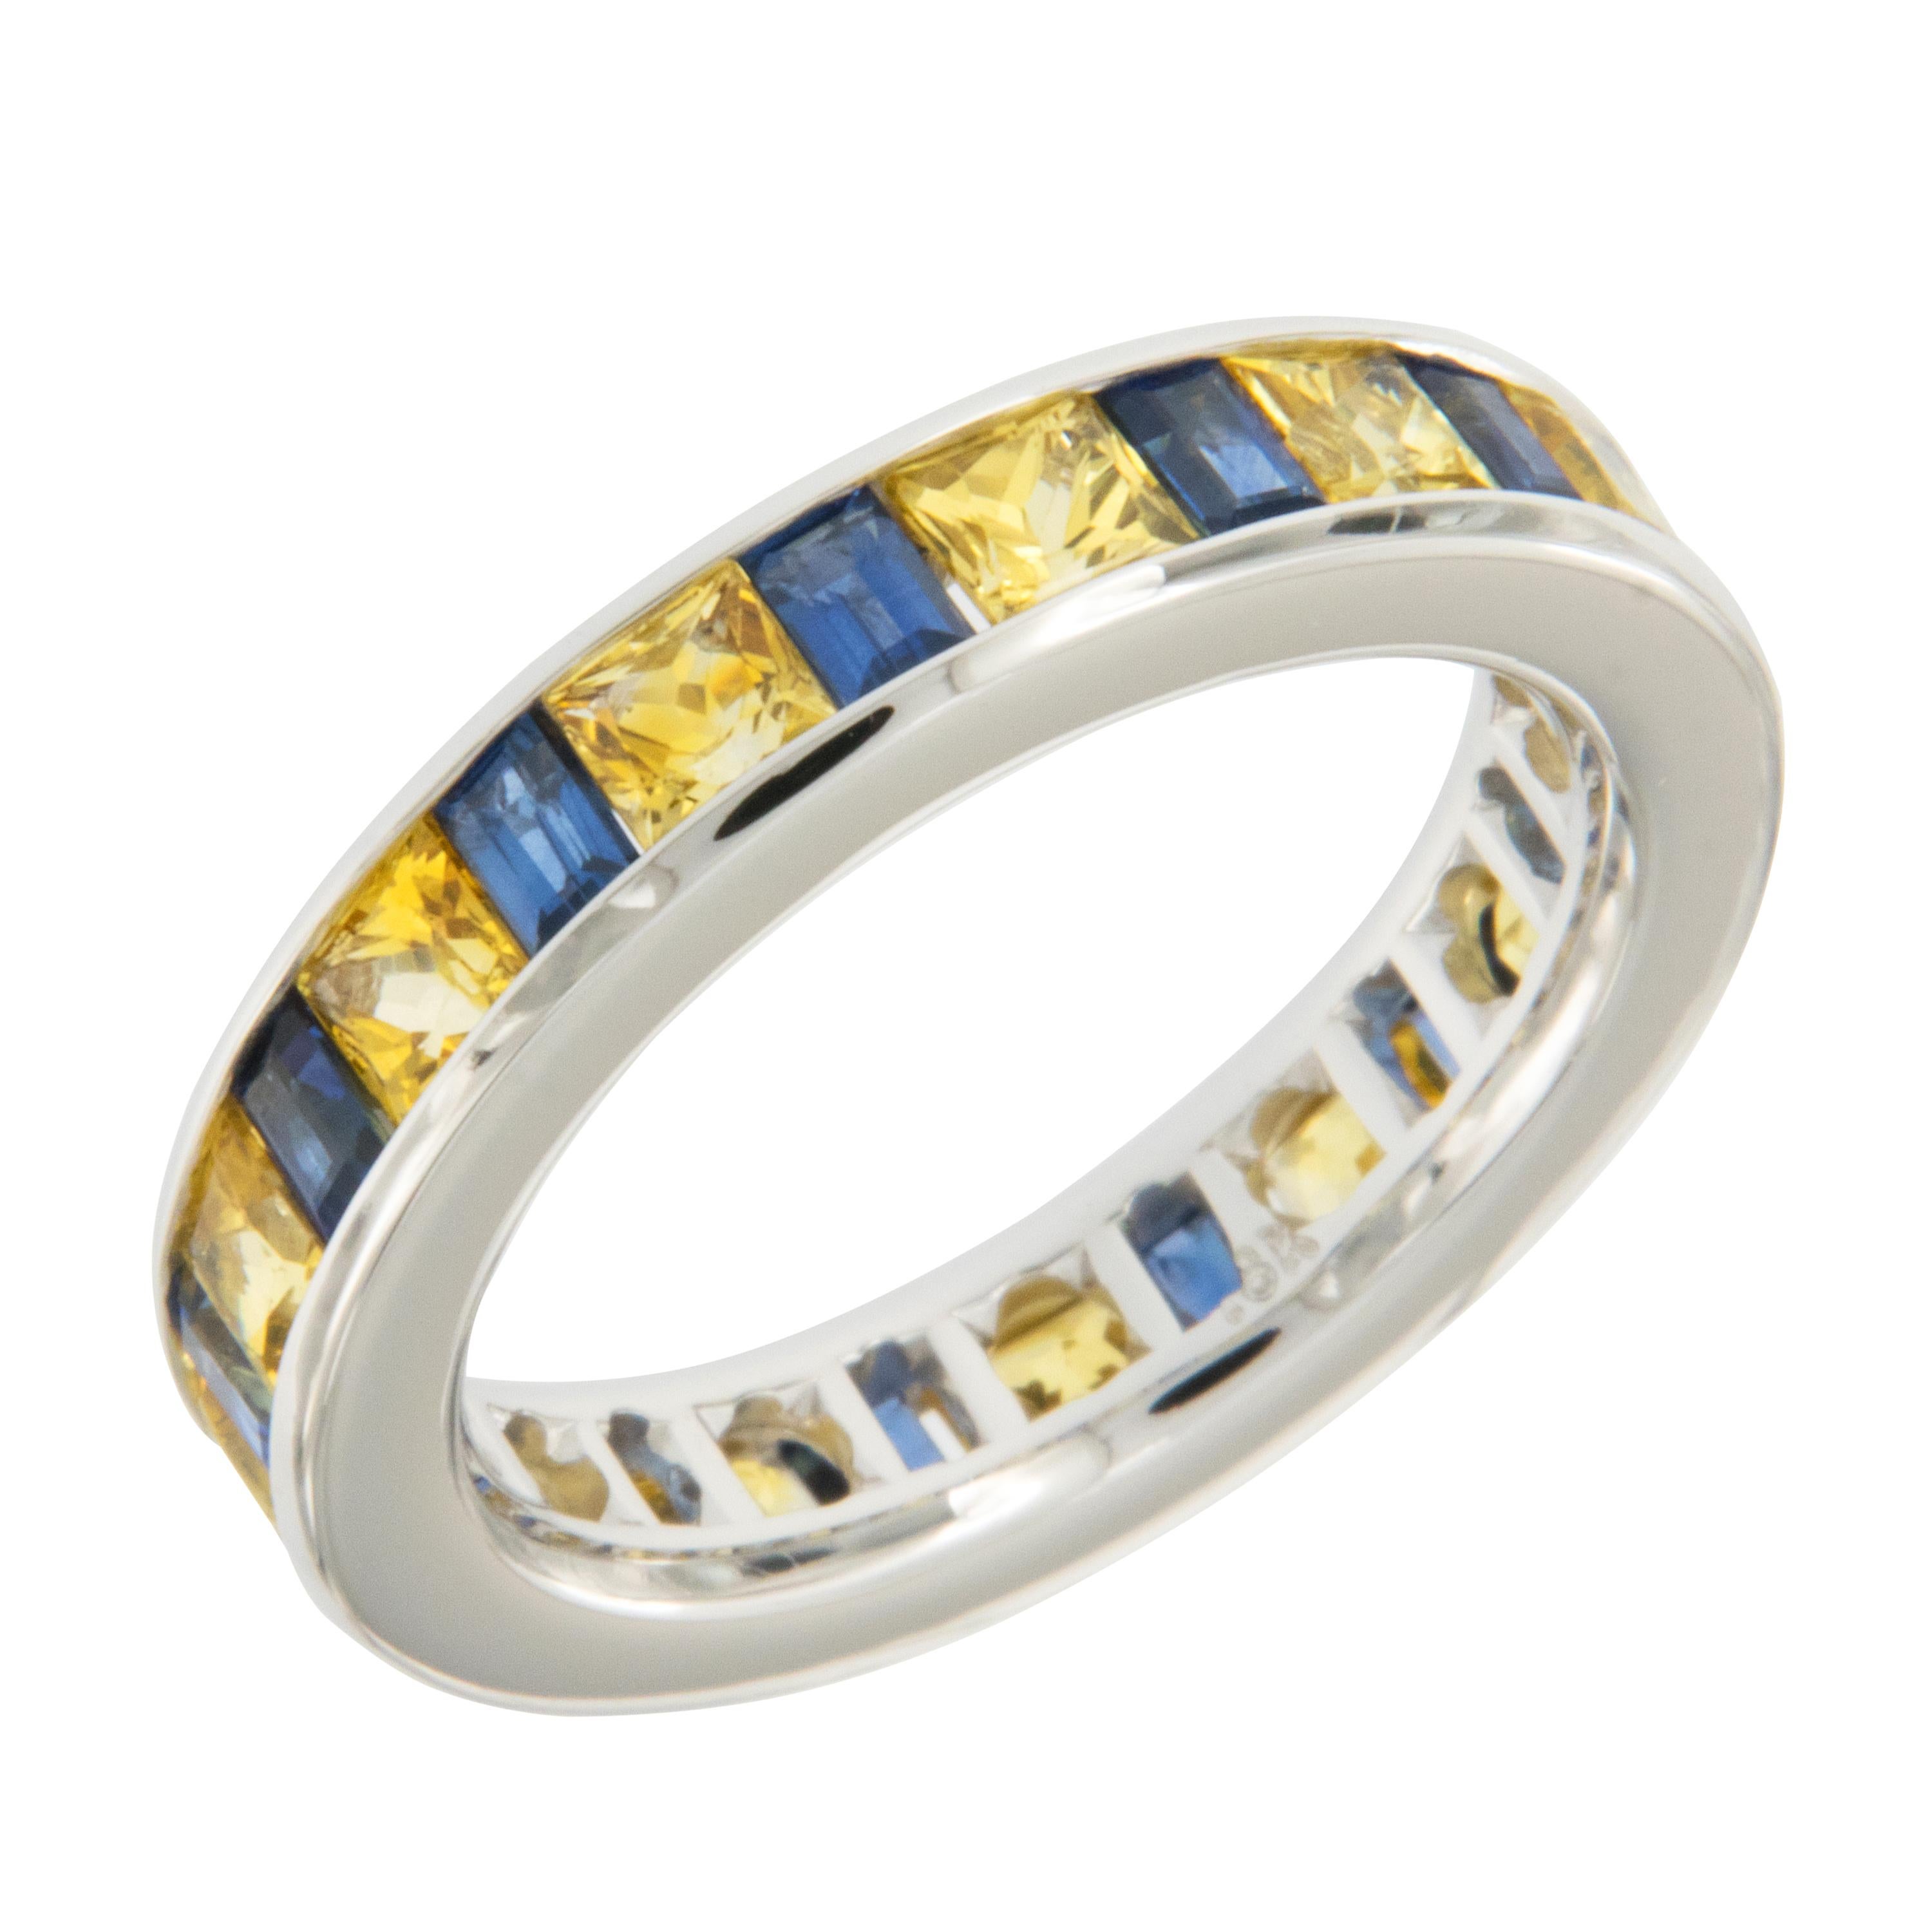 Hail to the victors! Whether you are a U of M Wolverine student, graduate, alumni, fan or just love the complimentary colors of blue & maize this ring is for you! Expertly hand fabricated ring in fine 18 karat white gold with perfectly channel set